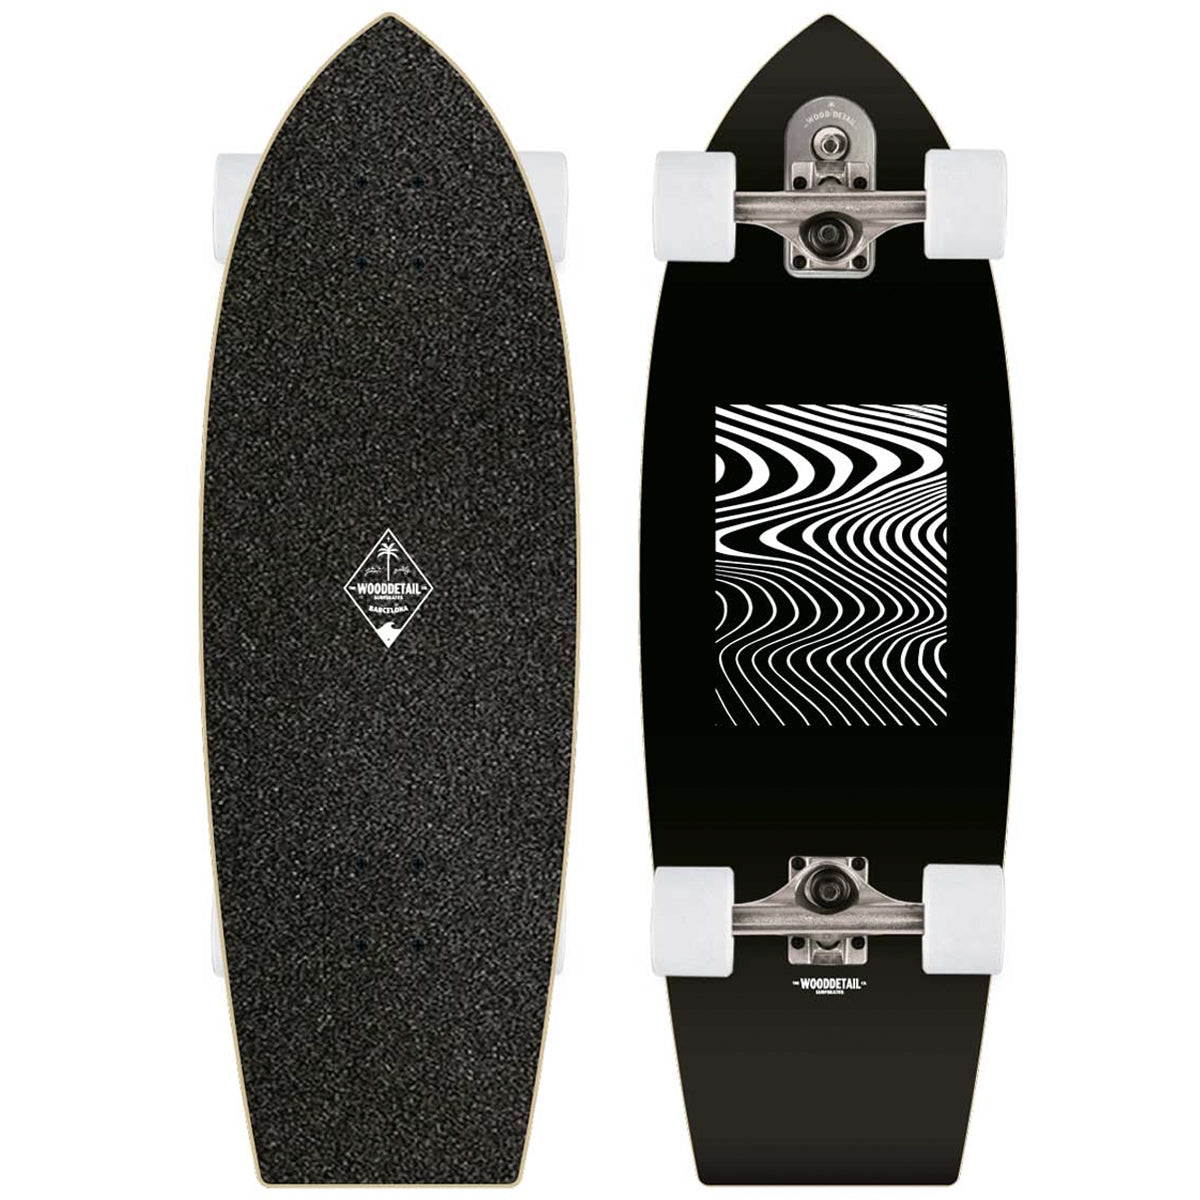 WoodDetail Peniche 32" Surfskate 2022 Complete